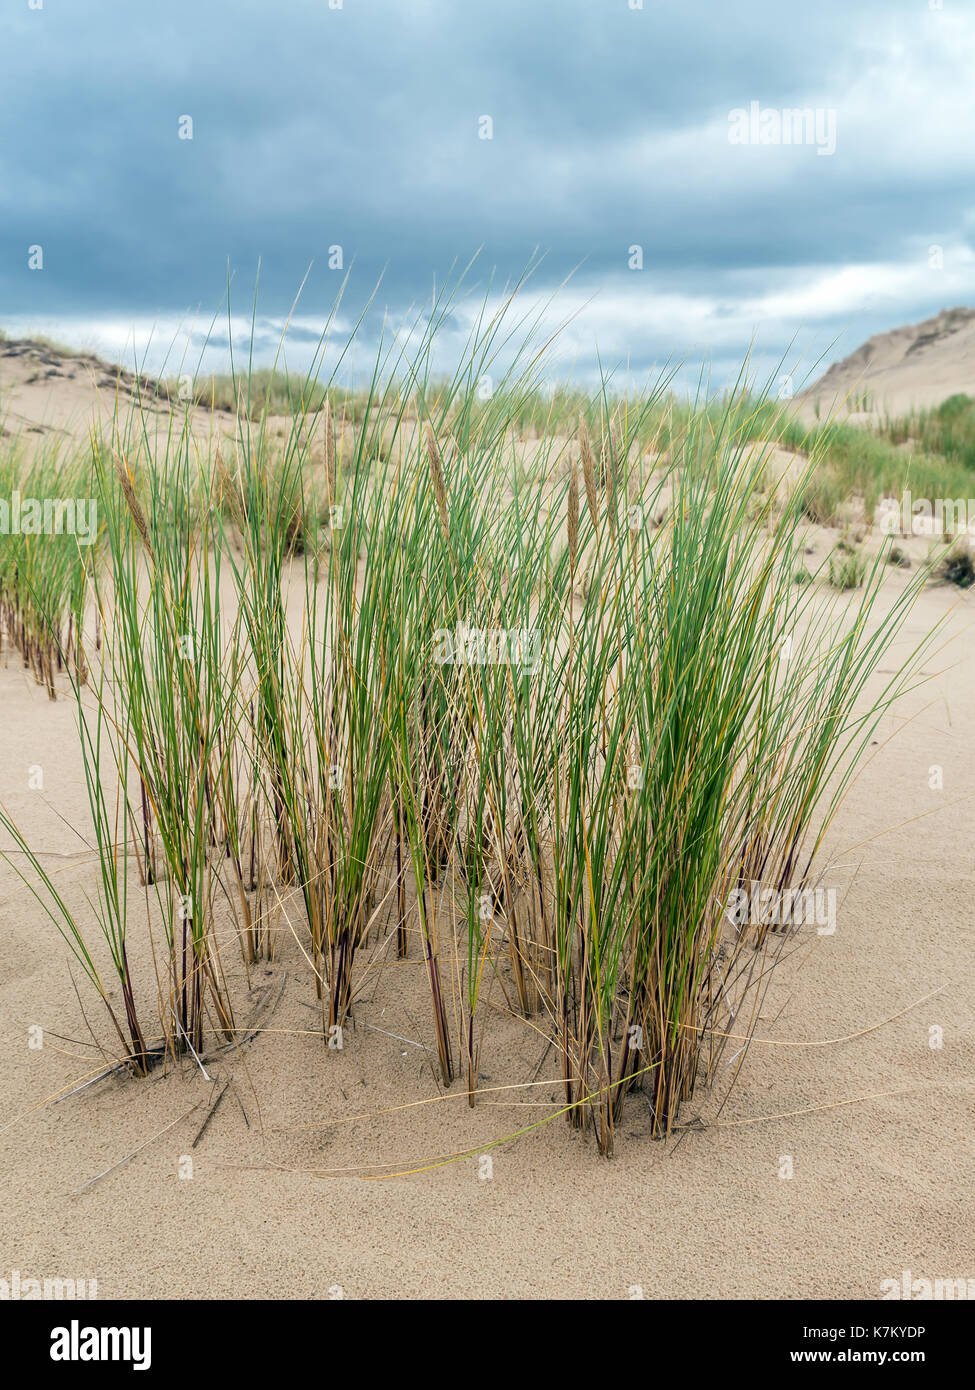 Dune grass called ammophila arenaria, growing on moving dune Wydma Czolpinska in the Slowinski National Park between Rowy and Leba, by the Baltic Sea, Stock Photo